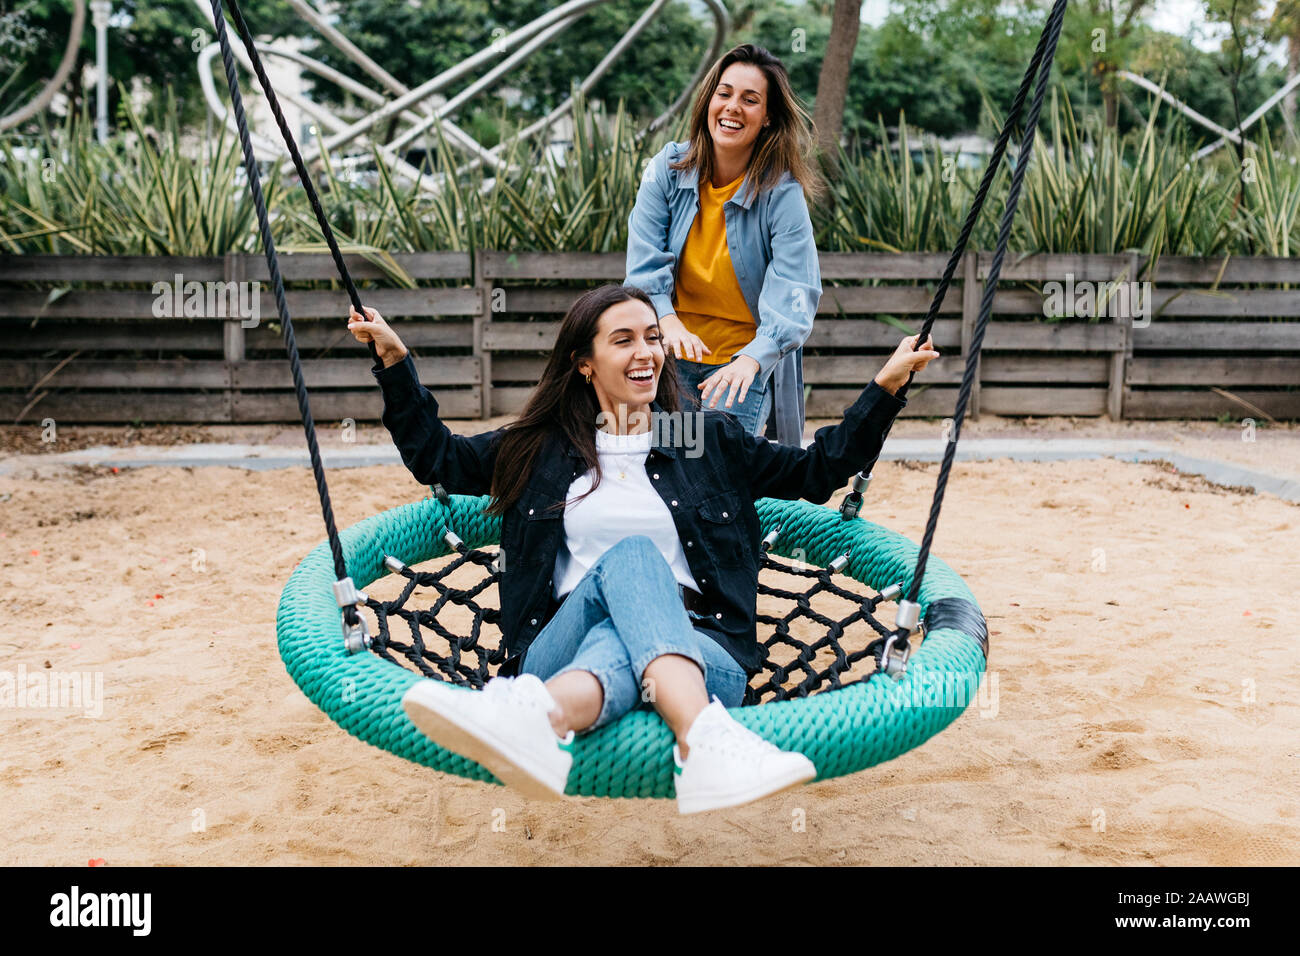 Two friends on playground, woman on a swing Stock Photo